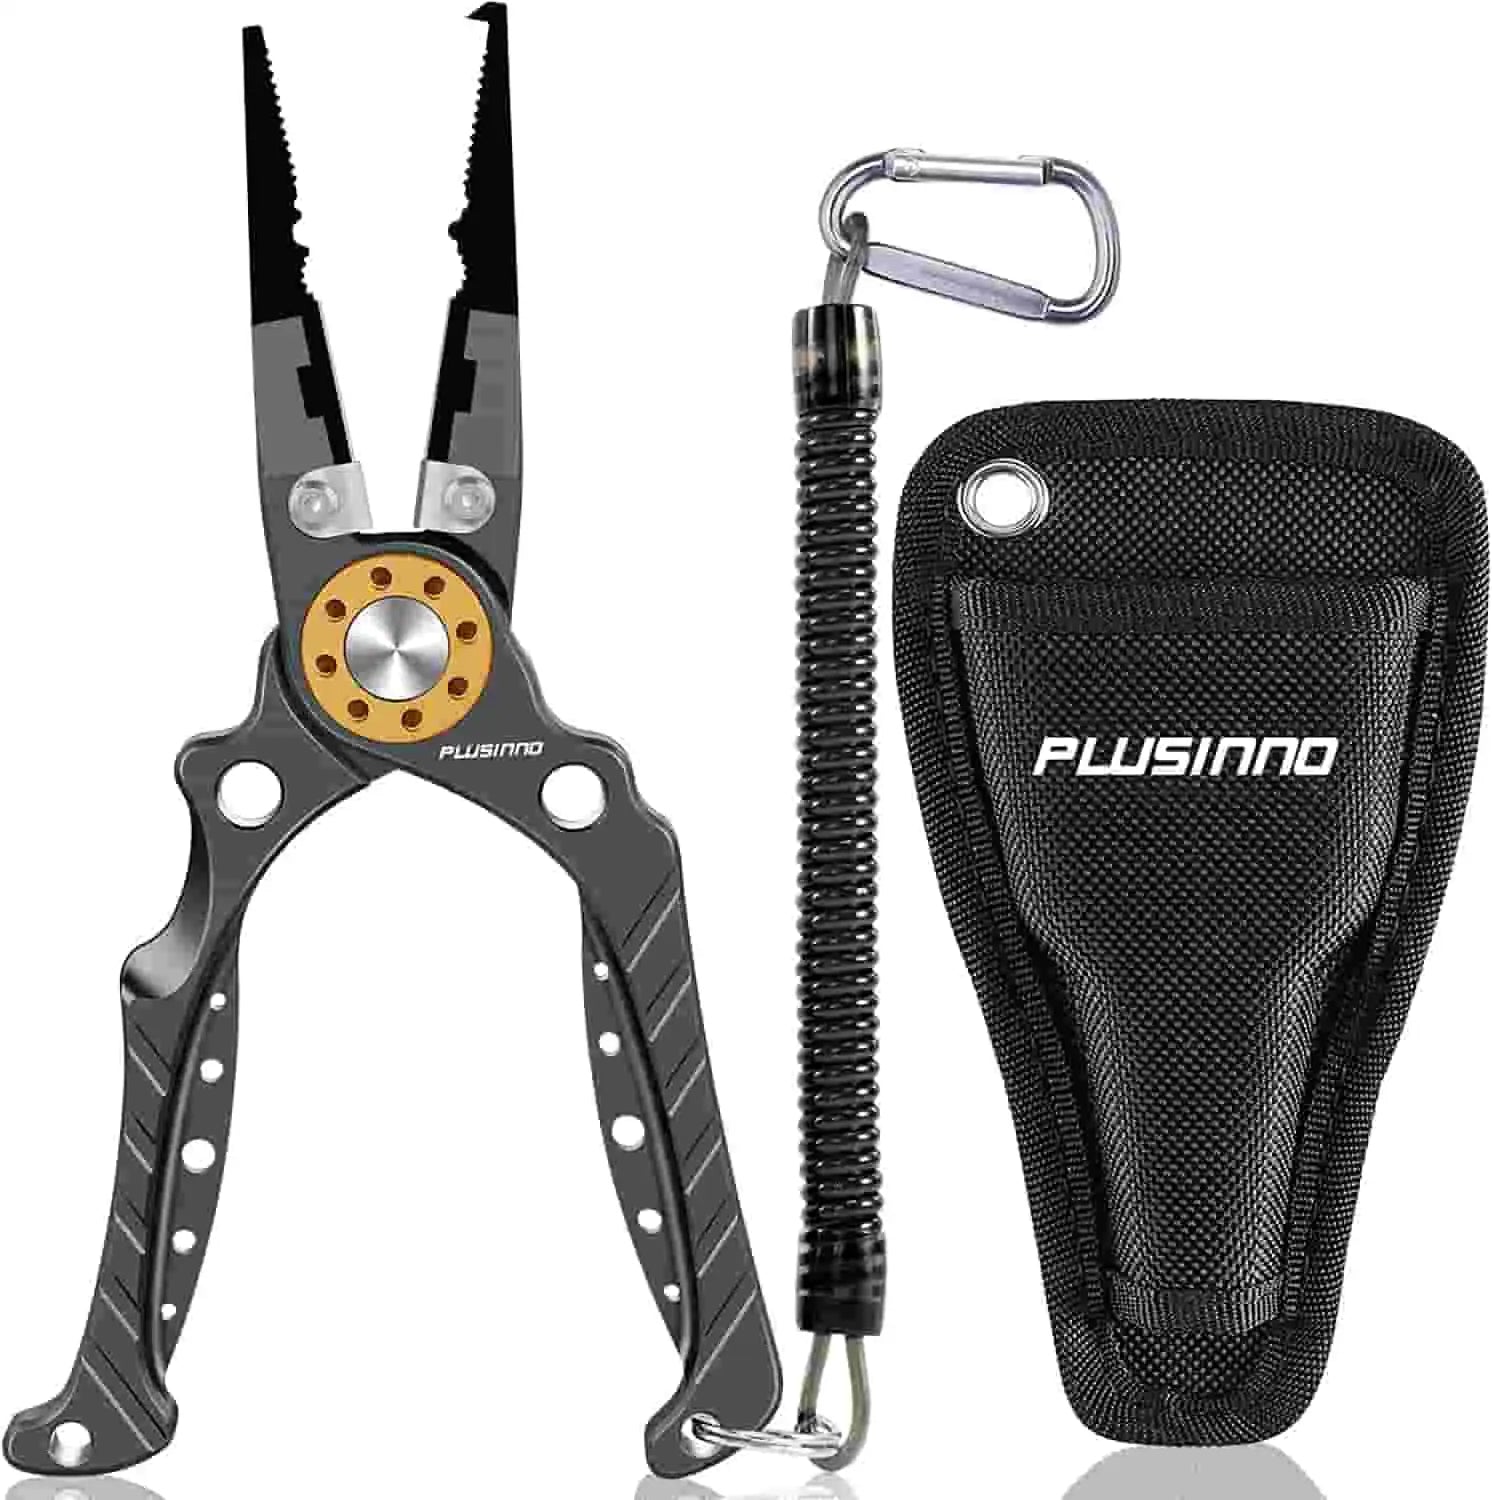 Best Budget Fishing Pliers To Buy In 2022